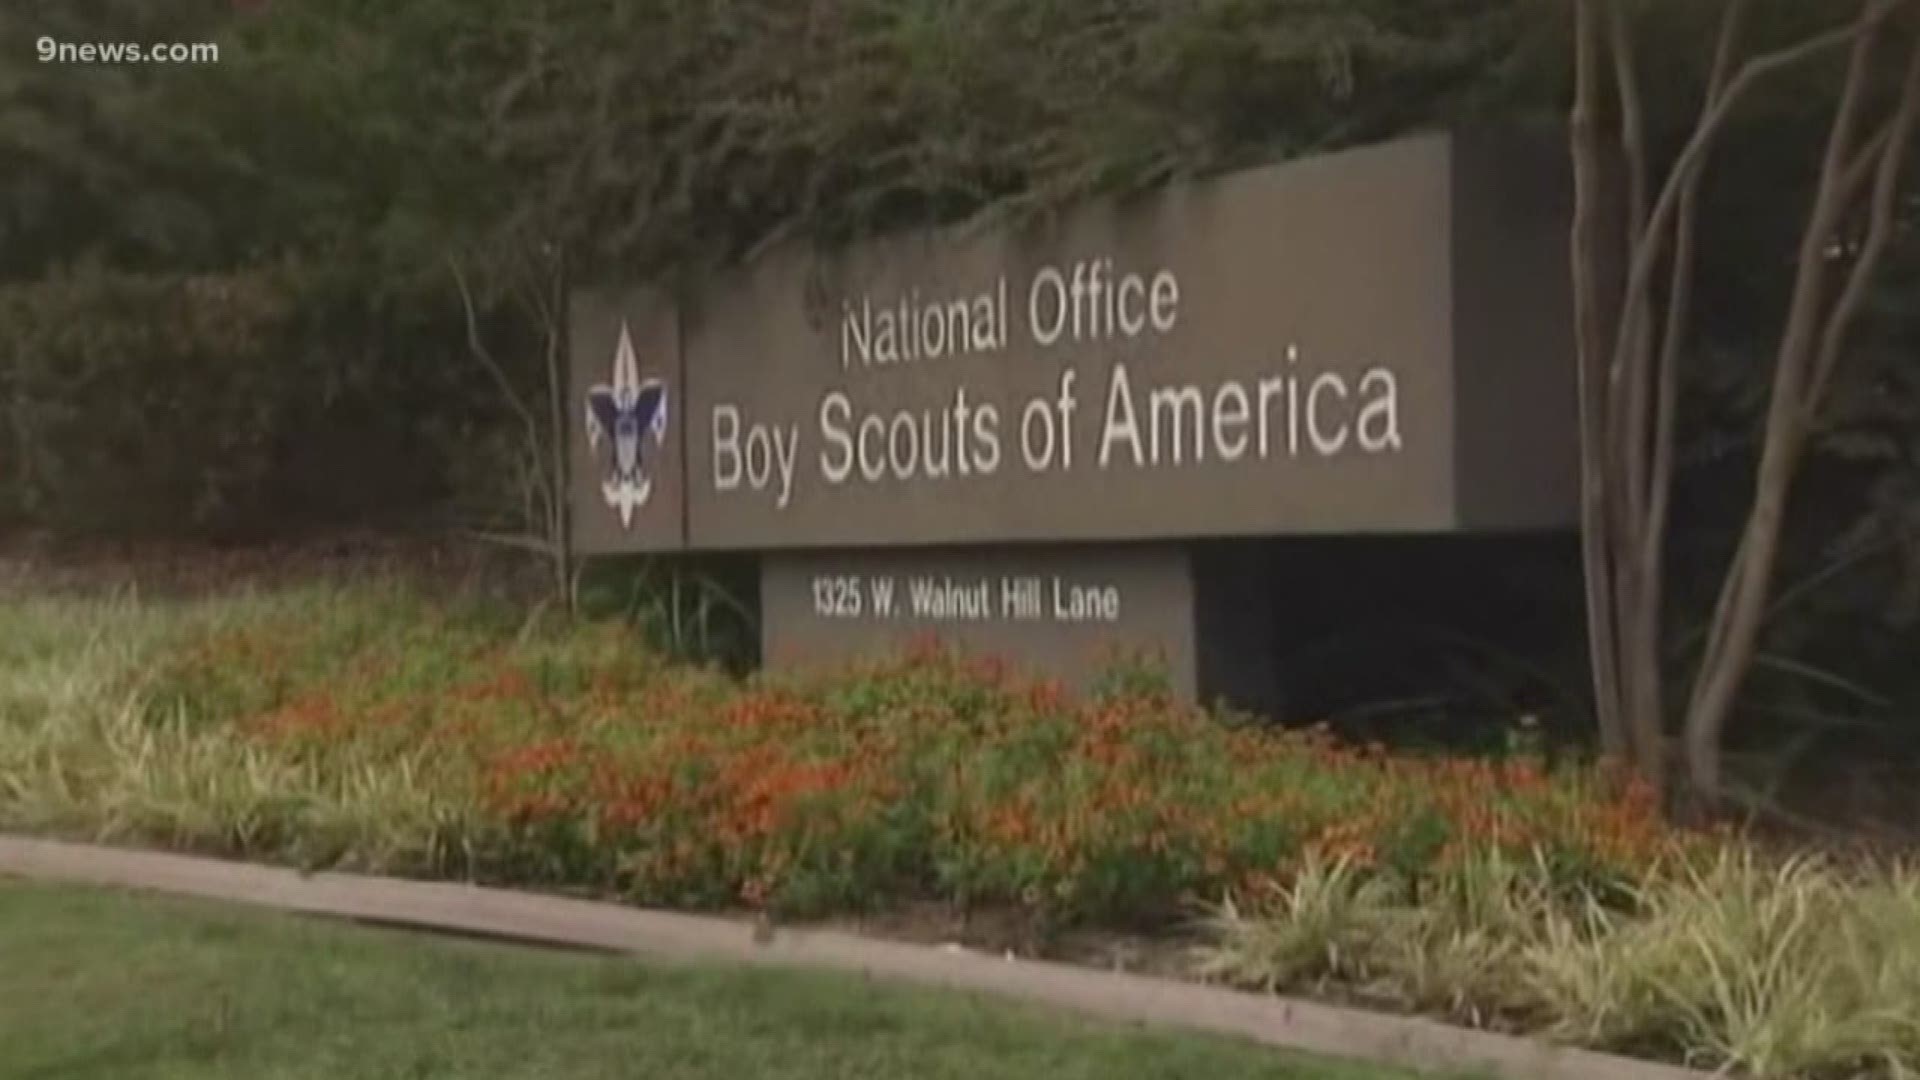 The Boy Scouts of America has filed for bankruptcy protection as it faces a barrage of new sex-abuse lawsuits. Legal analyst Whitney Traylor breaks it all down.